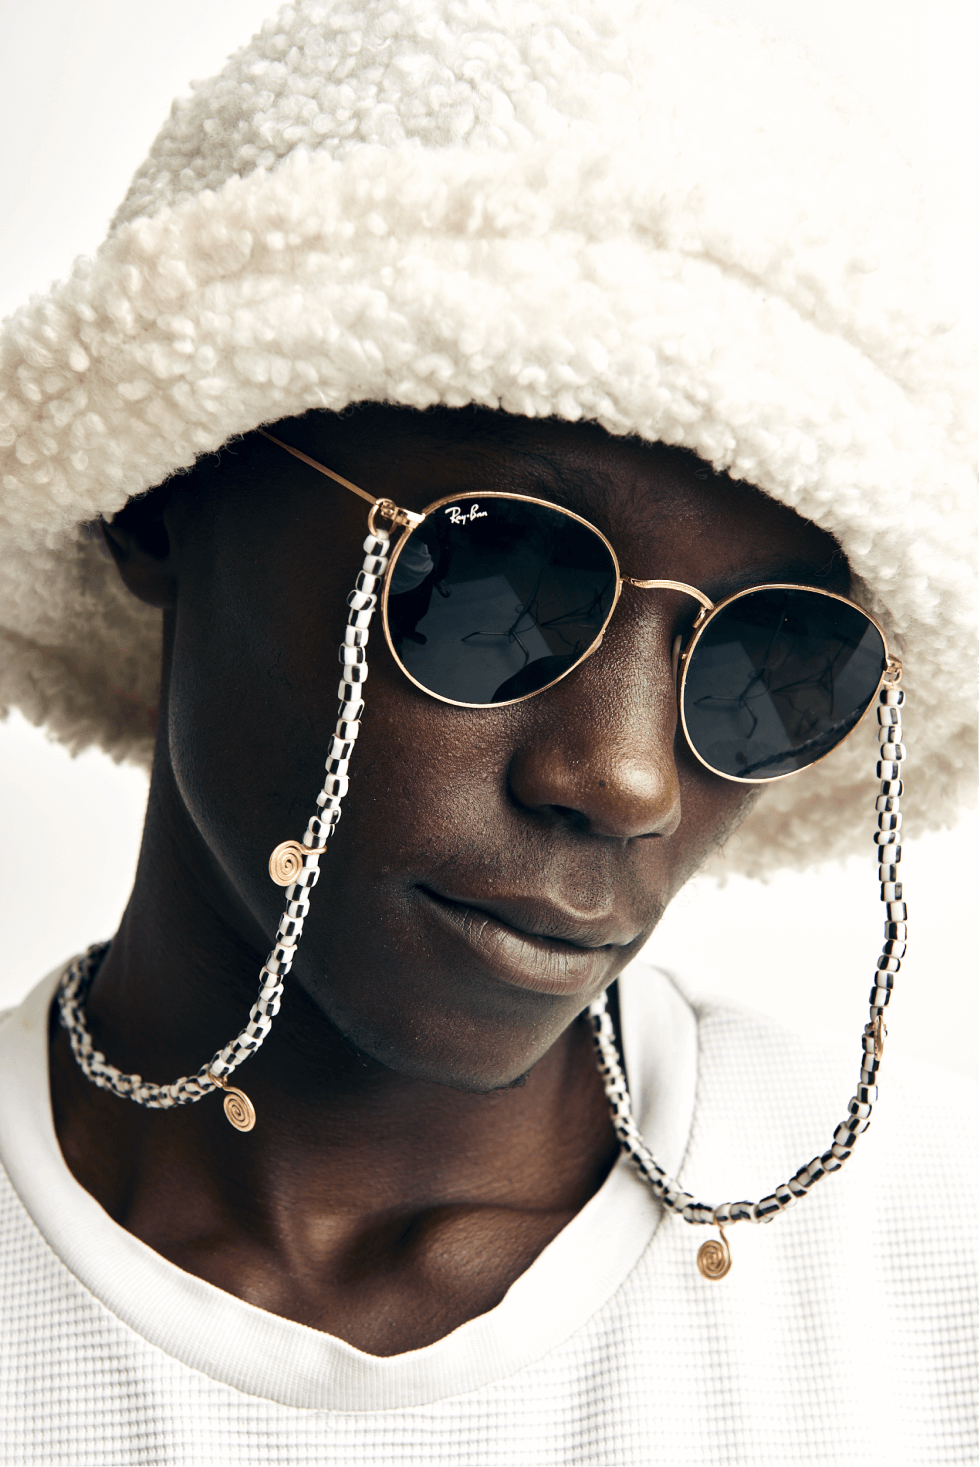 Shop The Antoine Sunglasses Cord by Soluna Collections on Arrai. Discover stylish, affordable clothing, jewelry, handbags and unique handmade pieces from top Kenyan & African fashion brands prioritising sustainability and quality craftsmanship.